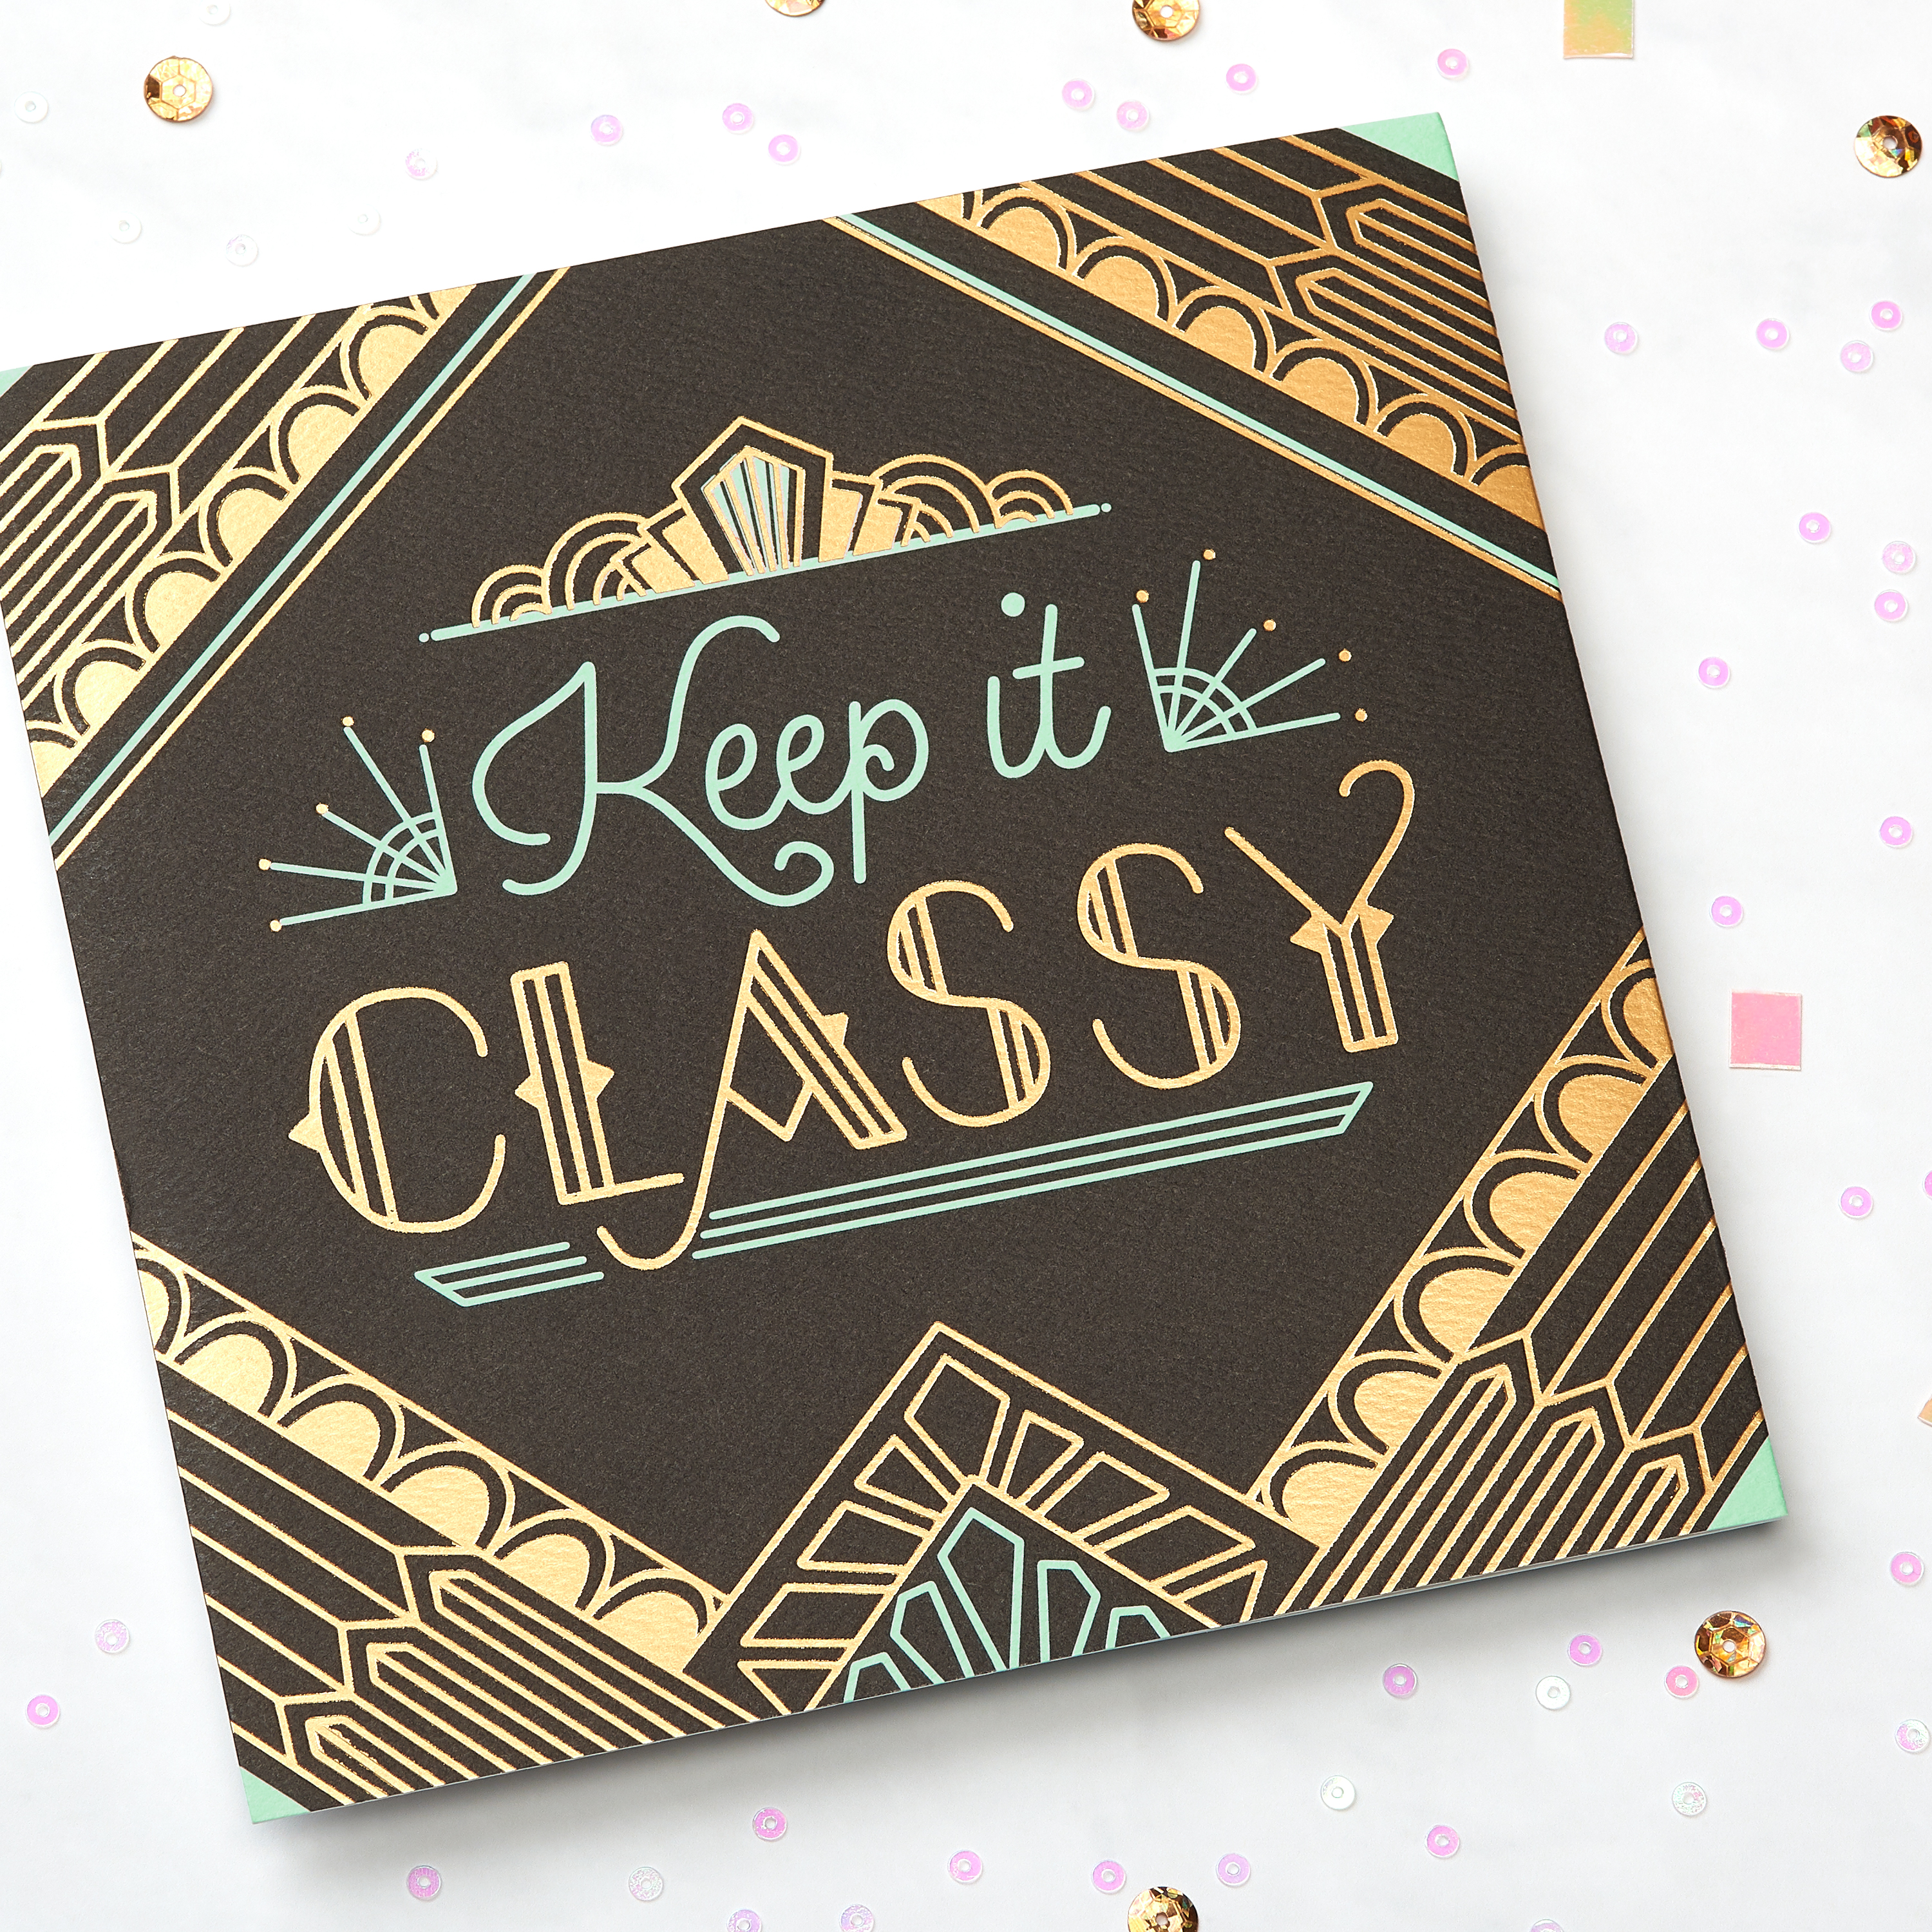 Classy Greeting Card - Birthday, Thinking of You, Congratulations image